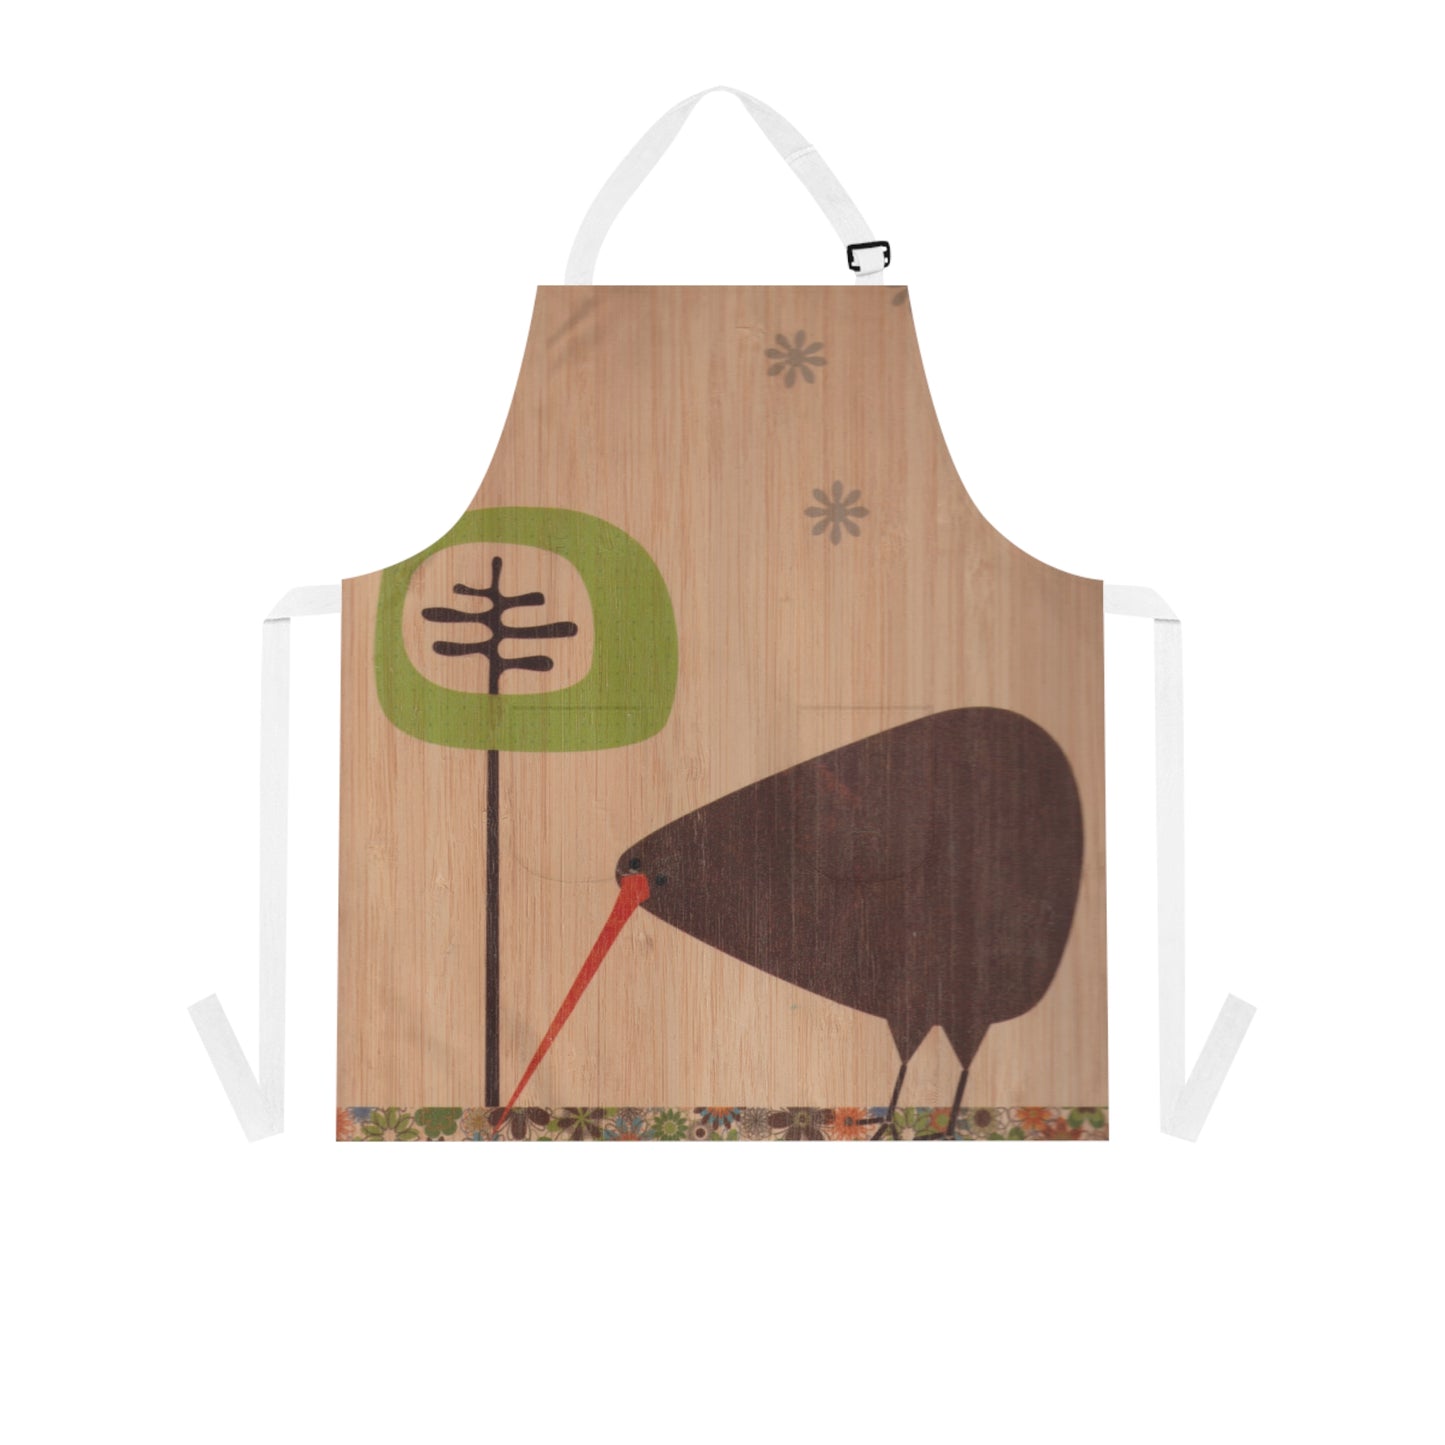 NZ Made Food Day Apron